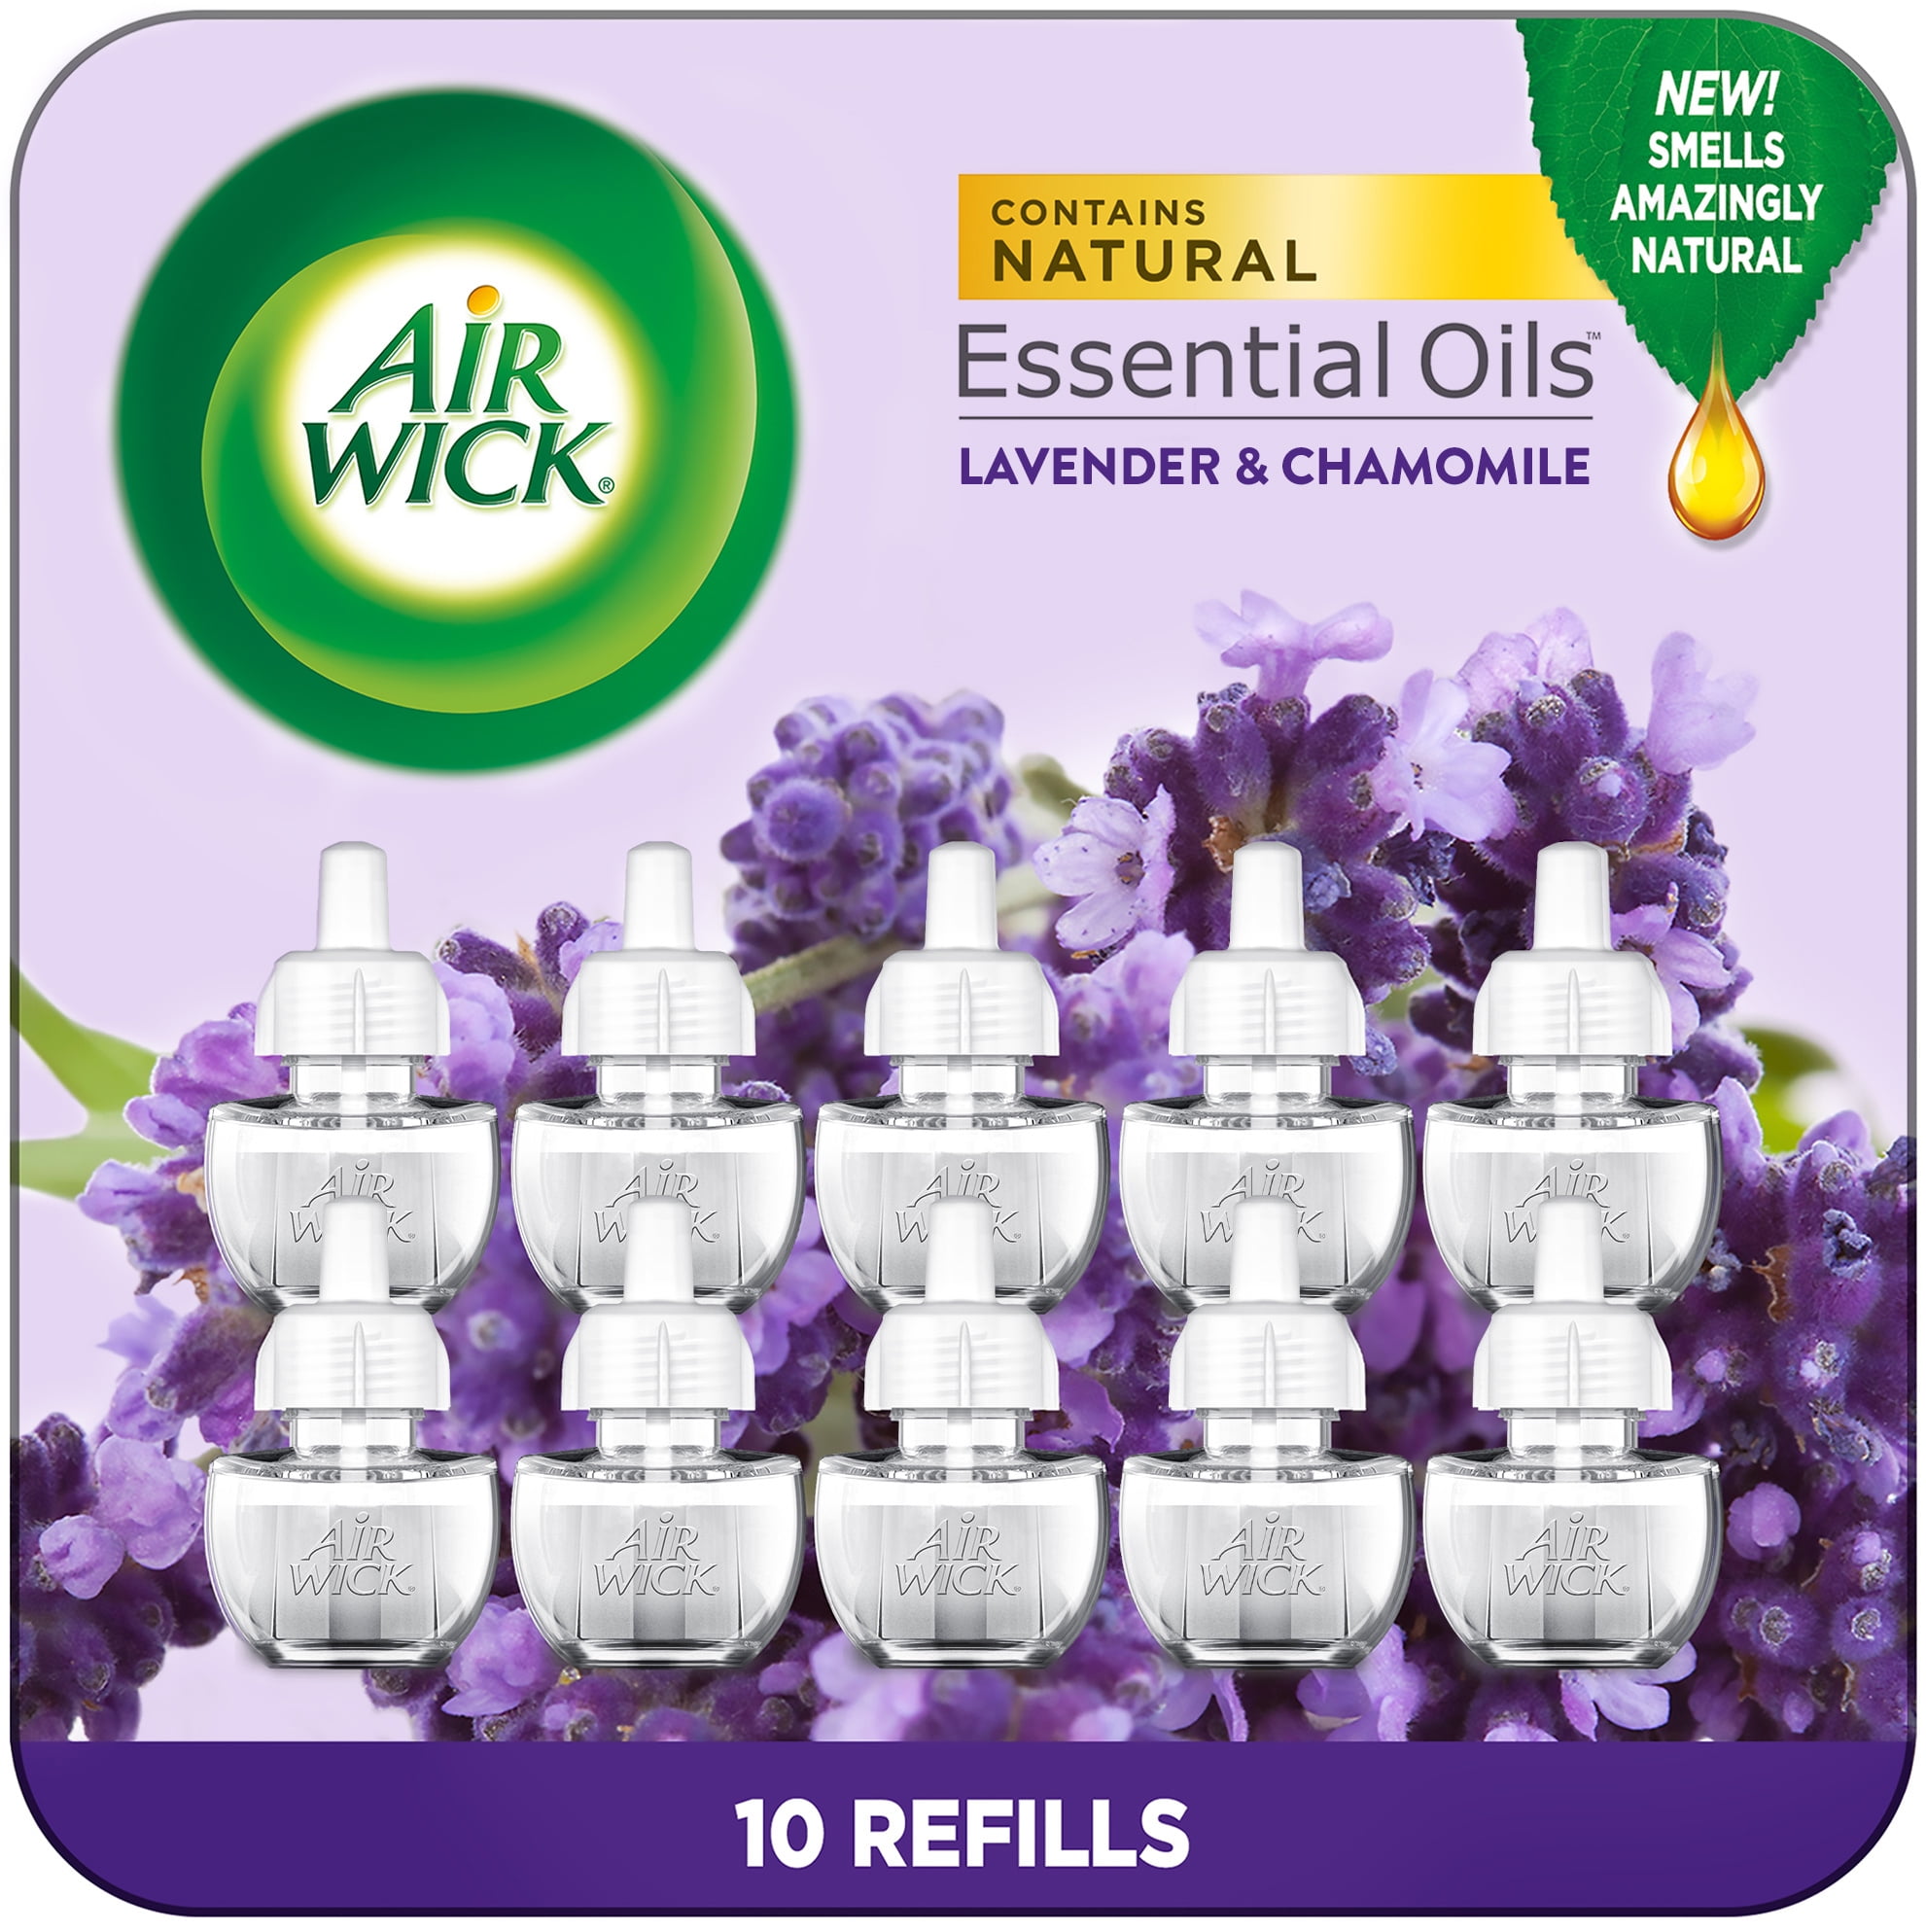 How to Use: Air Wick Scented Oils 